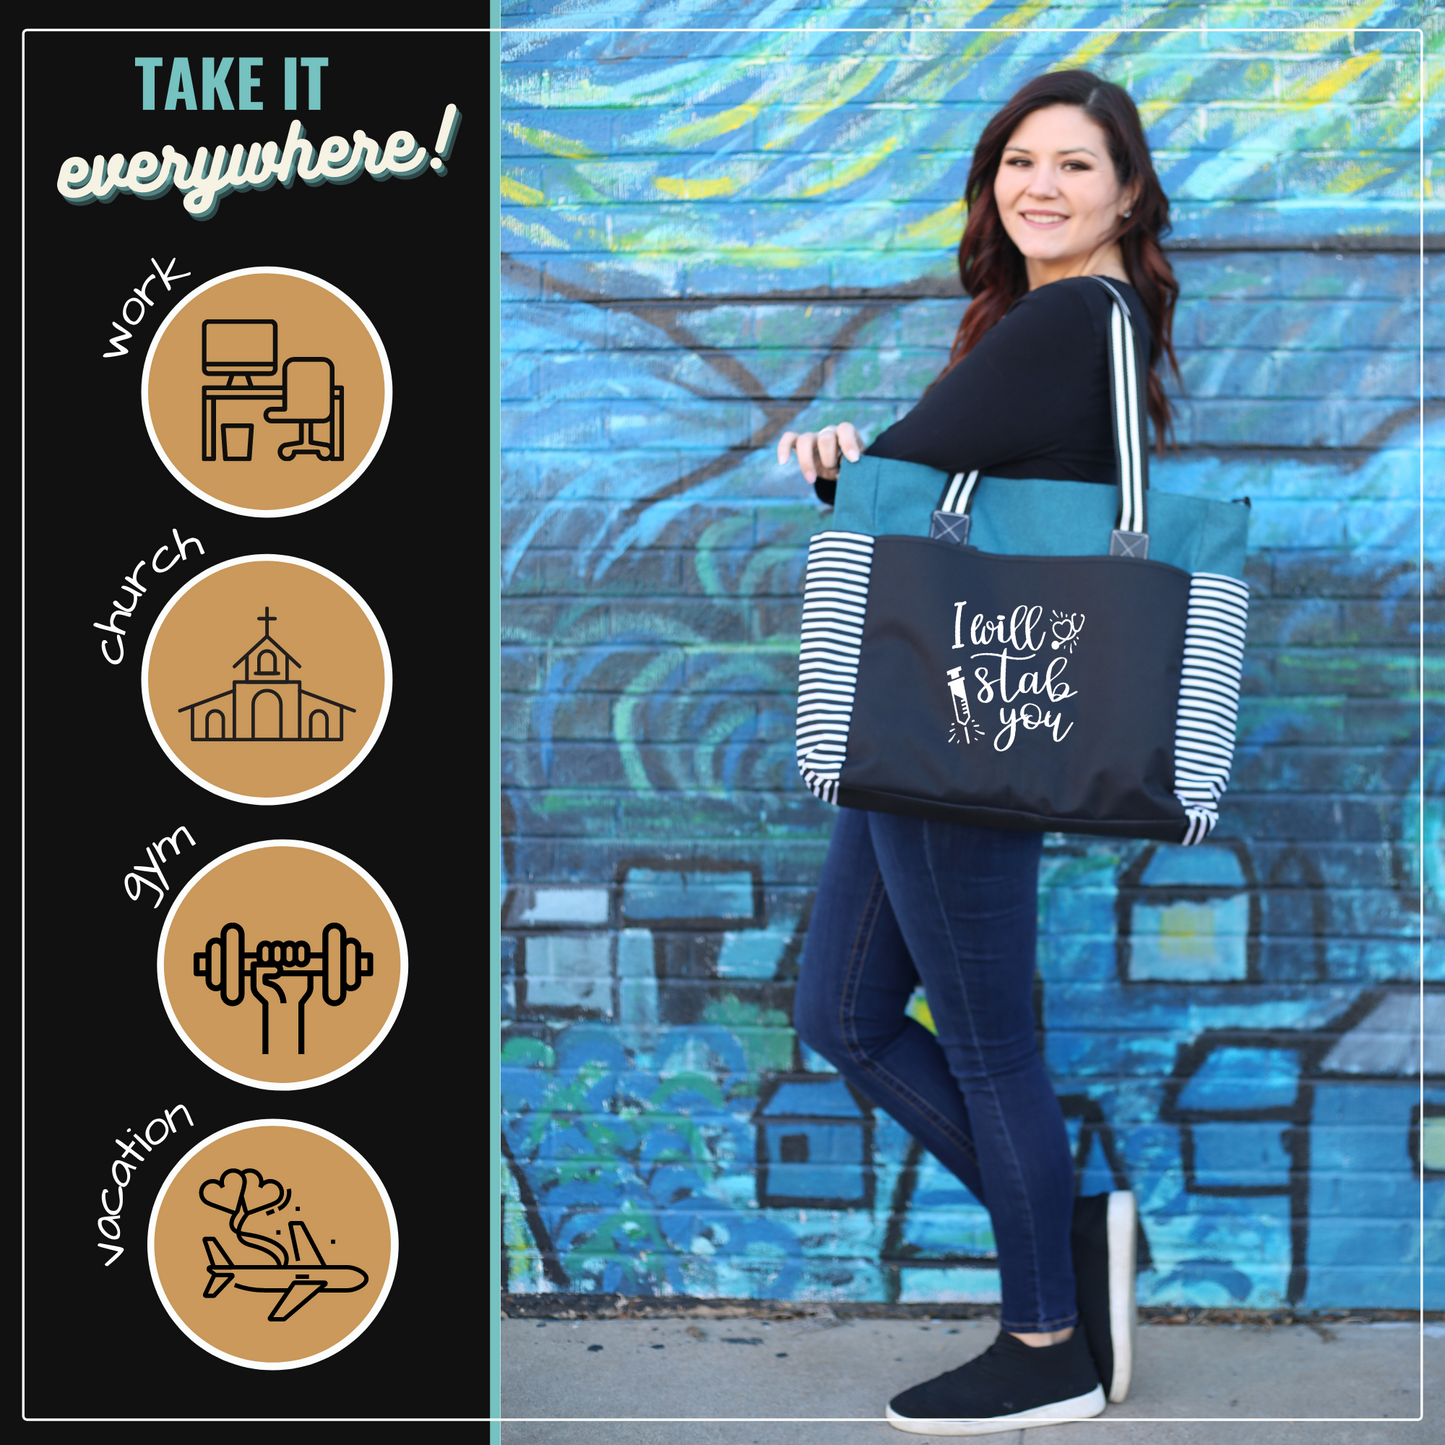 I Will Stab You LouLou Teal Tote Bag for Medical Workers